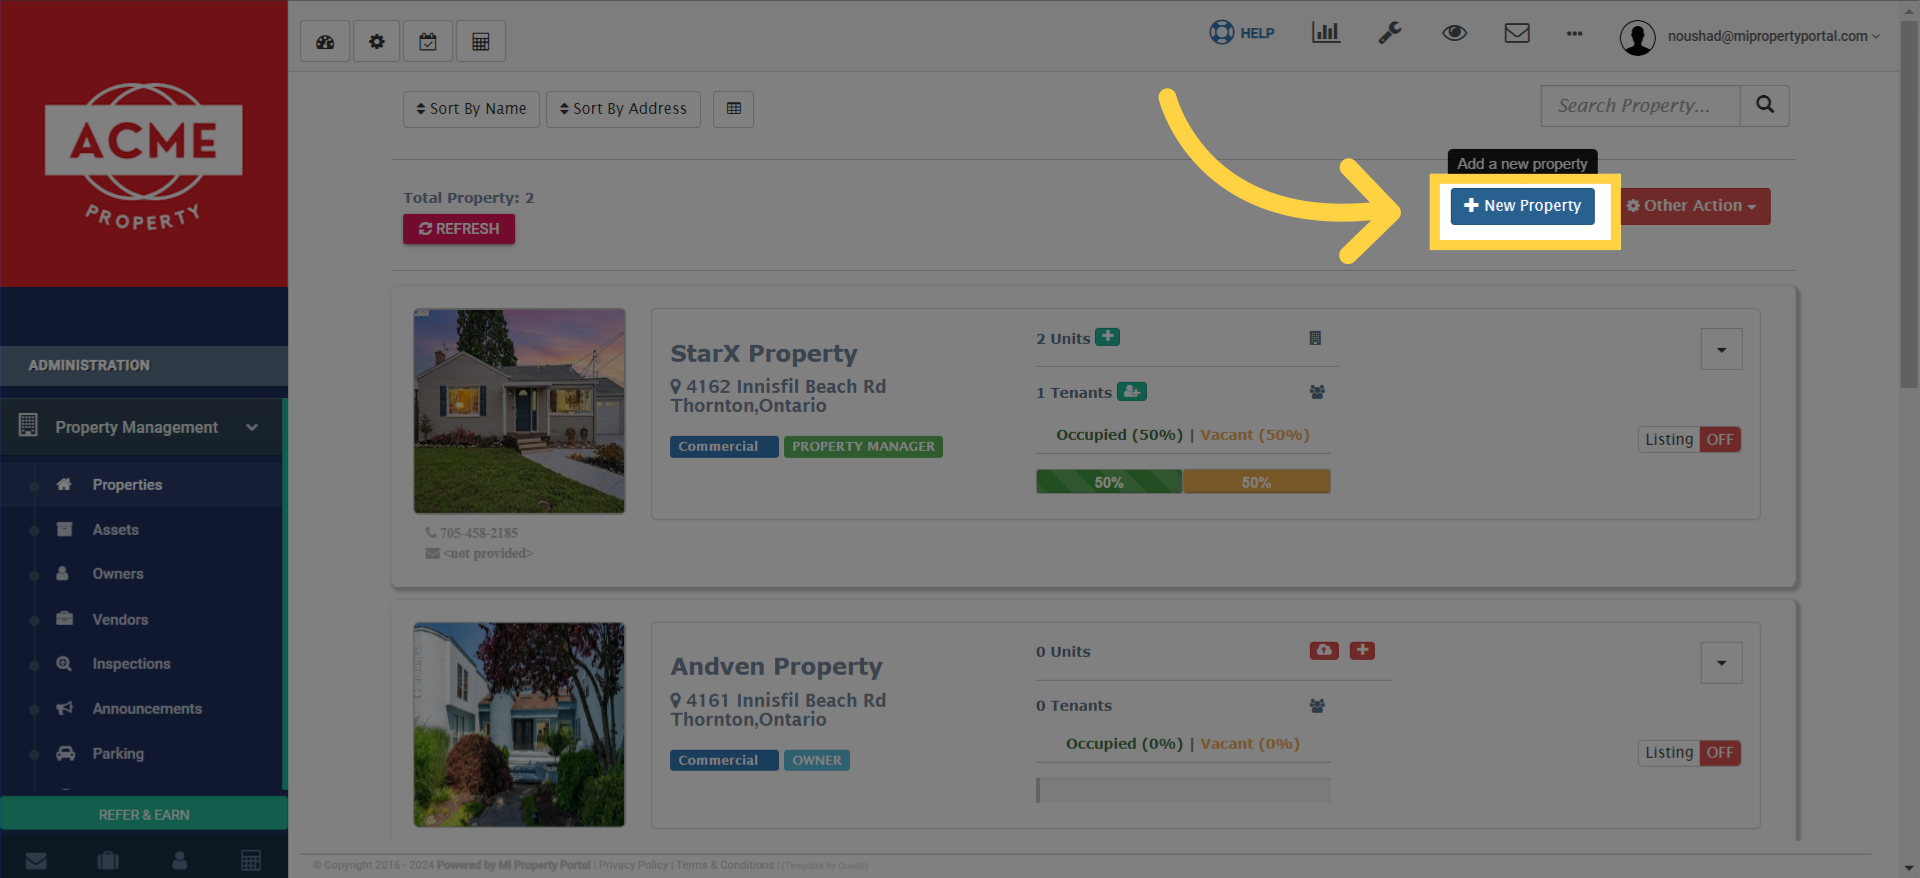 Click on this 'New Property' icon